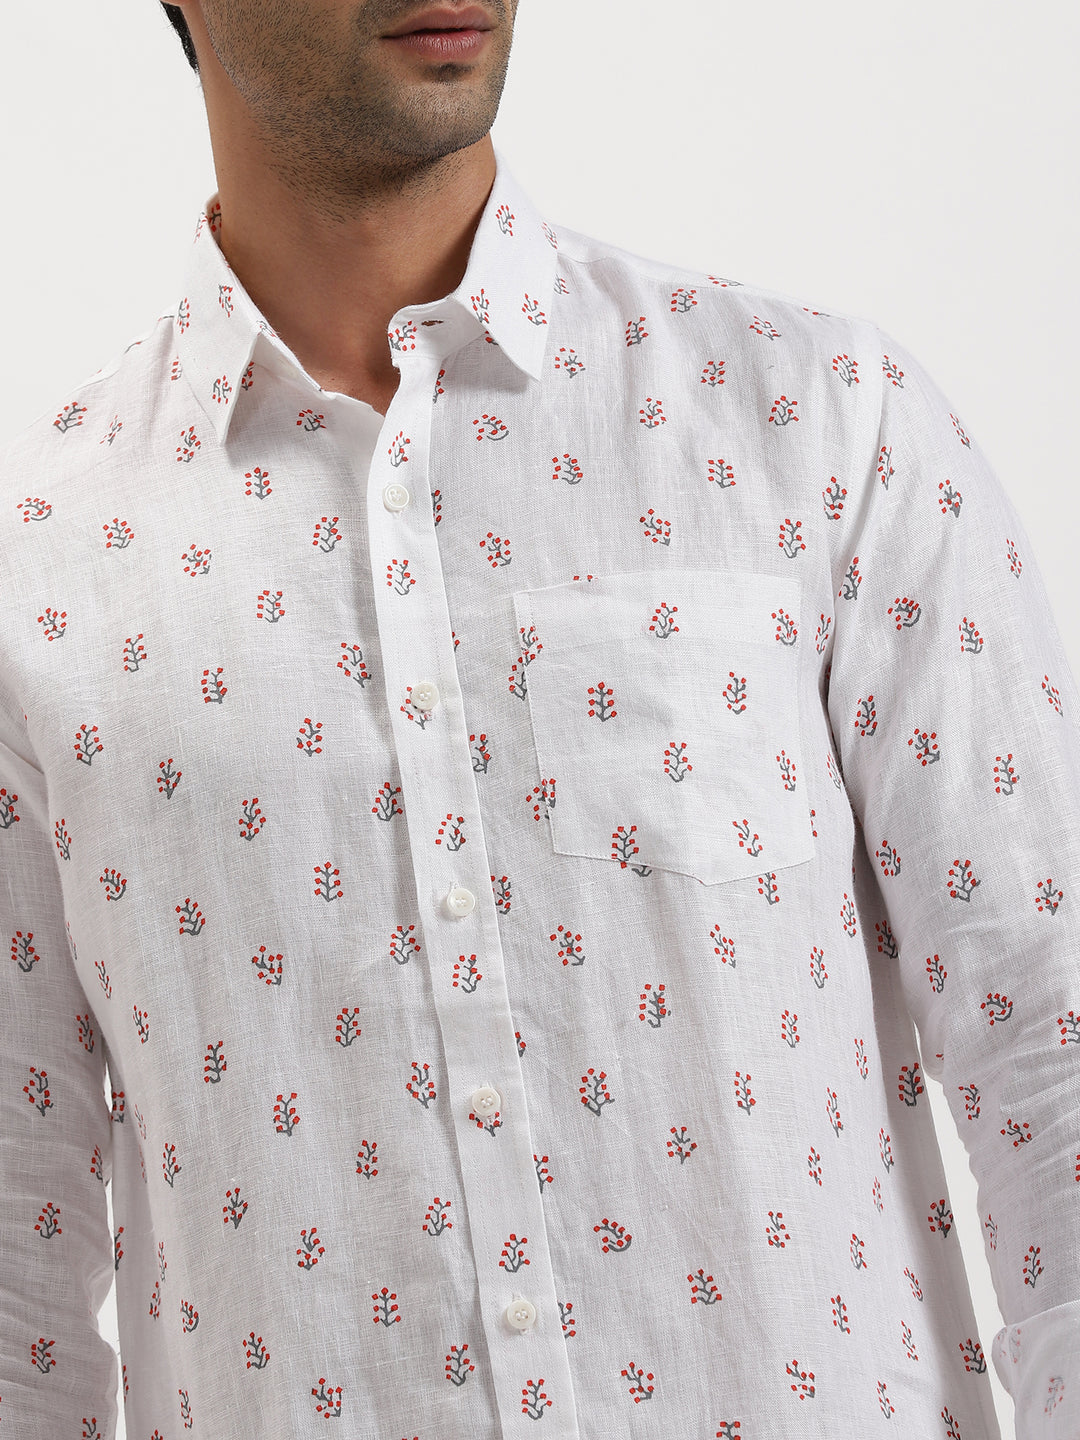 Archer - Pure Linen Block Printed Full Sleeve Shirt - Grey & Red